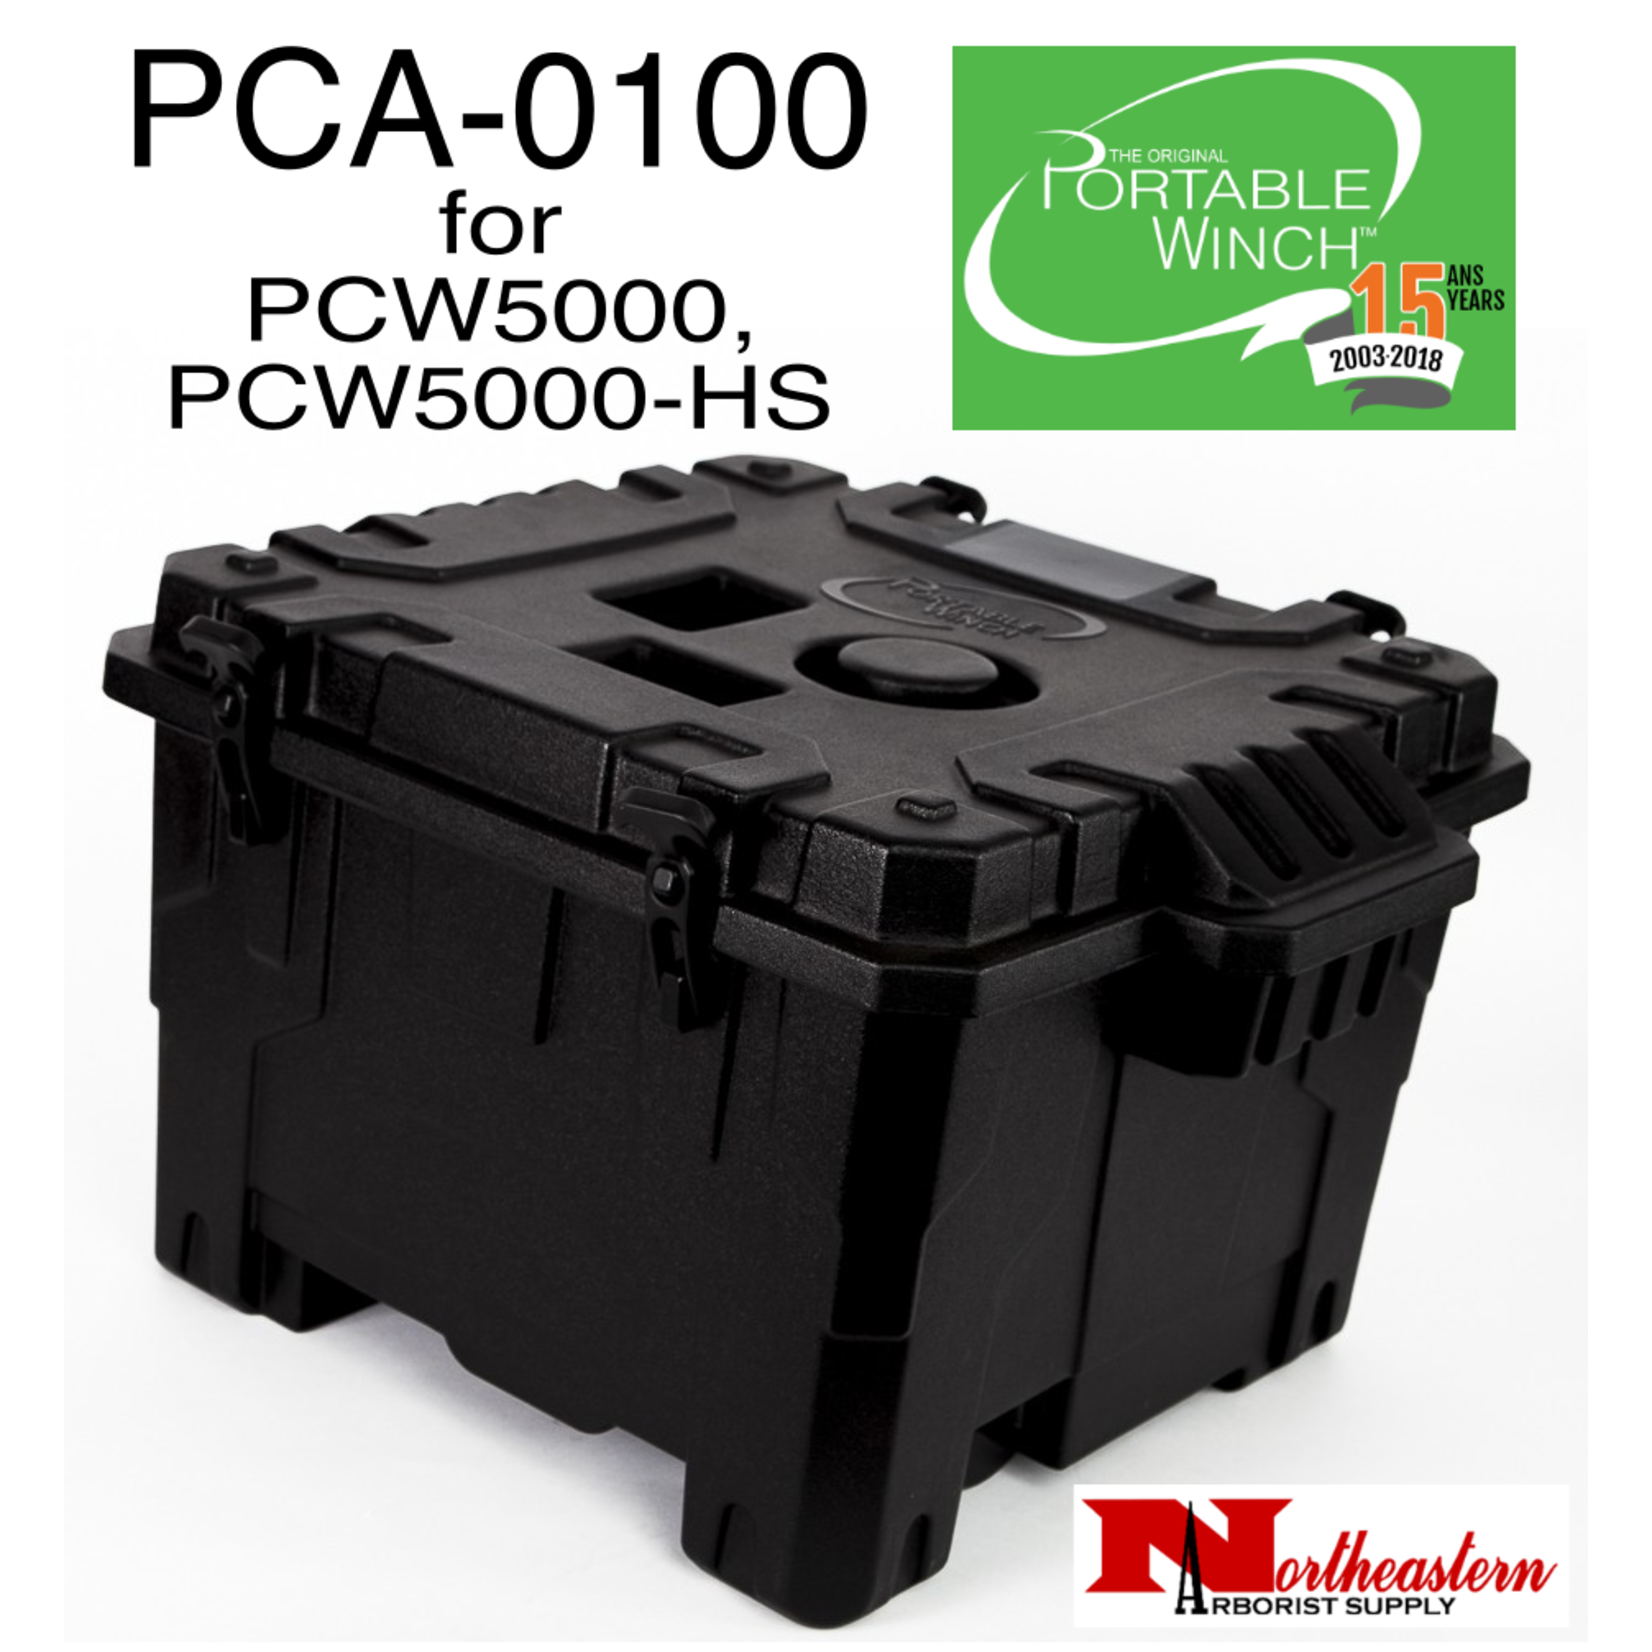 PORTABLE WINCH CO. Case With Molded Parts is Specially Designed For The PCW5000 & PCW5000-HS Winches